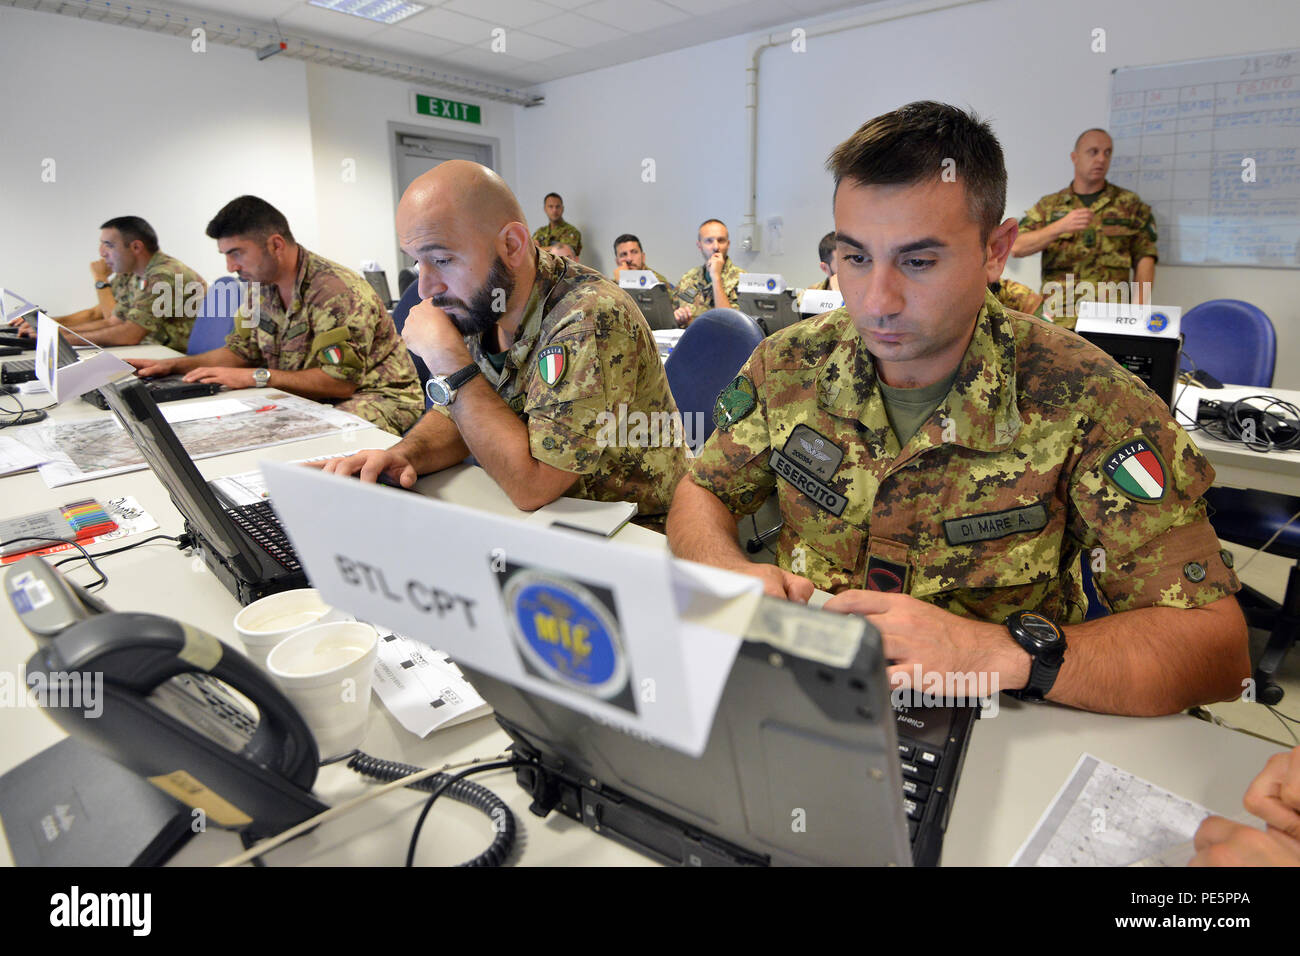 Italian Soldiers of the 183 Reggimento Paracadutisti Brigata Folgore Pistoia participate in NIE 16.1 (Network Integration Evaluation 16.1) exercise at Caserma Ederle Vicenza, Italy, Sept. 28, 2015. The NIE 16.1 is a multi-nation exercise designed to increase interoperability and communication between U.S. and NATO Friendly Force. (U.S. Army photo by Visual Information Specialist Paolo Bovo/released) Stock Photo